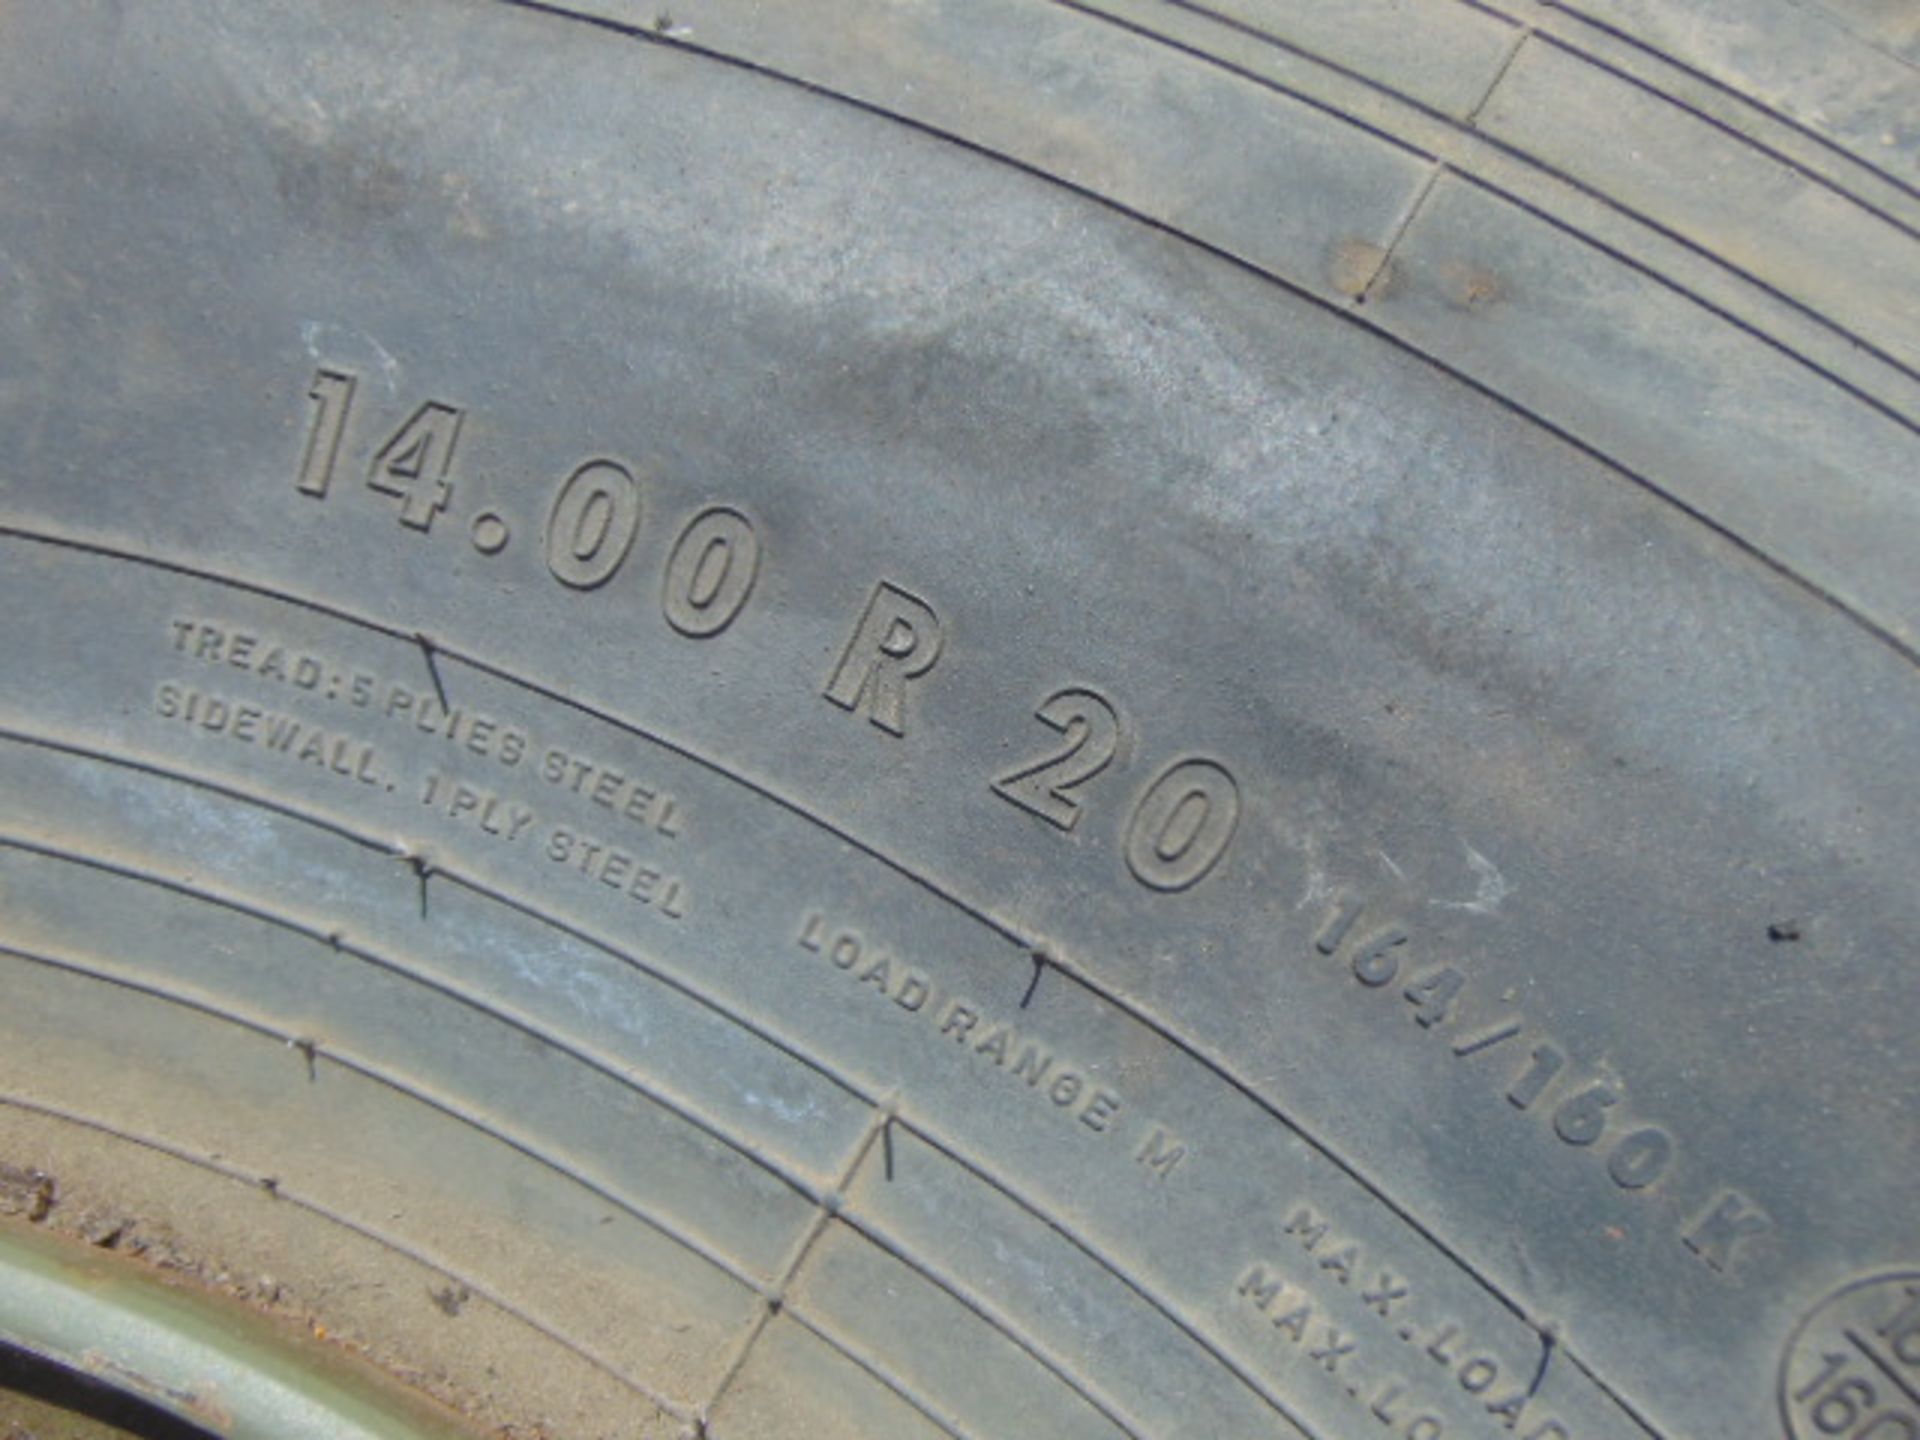 1 x Continental 14.00 R20 Tyre complete with 10 stud rim - Image 5 of 6